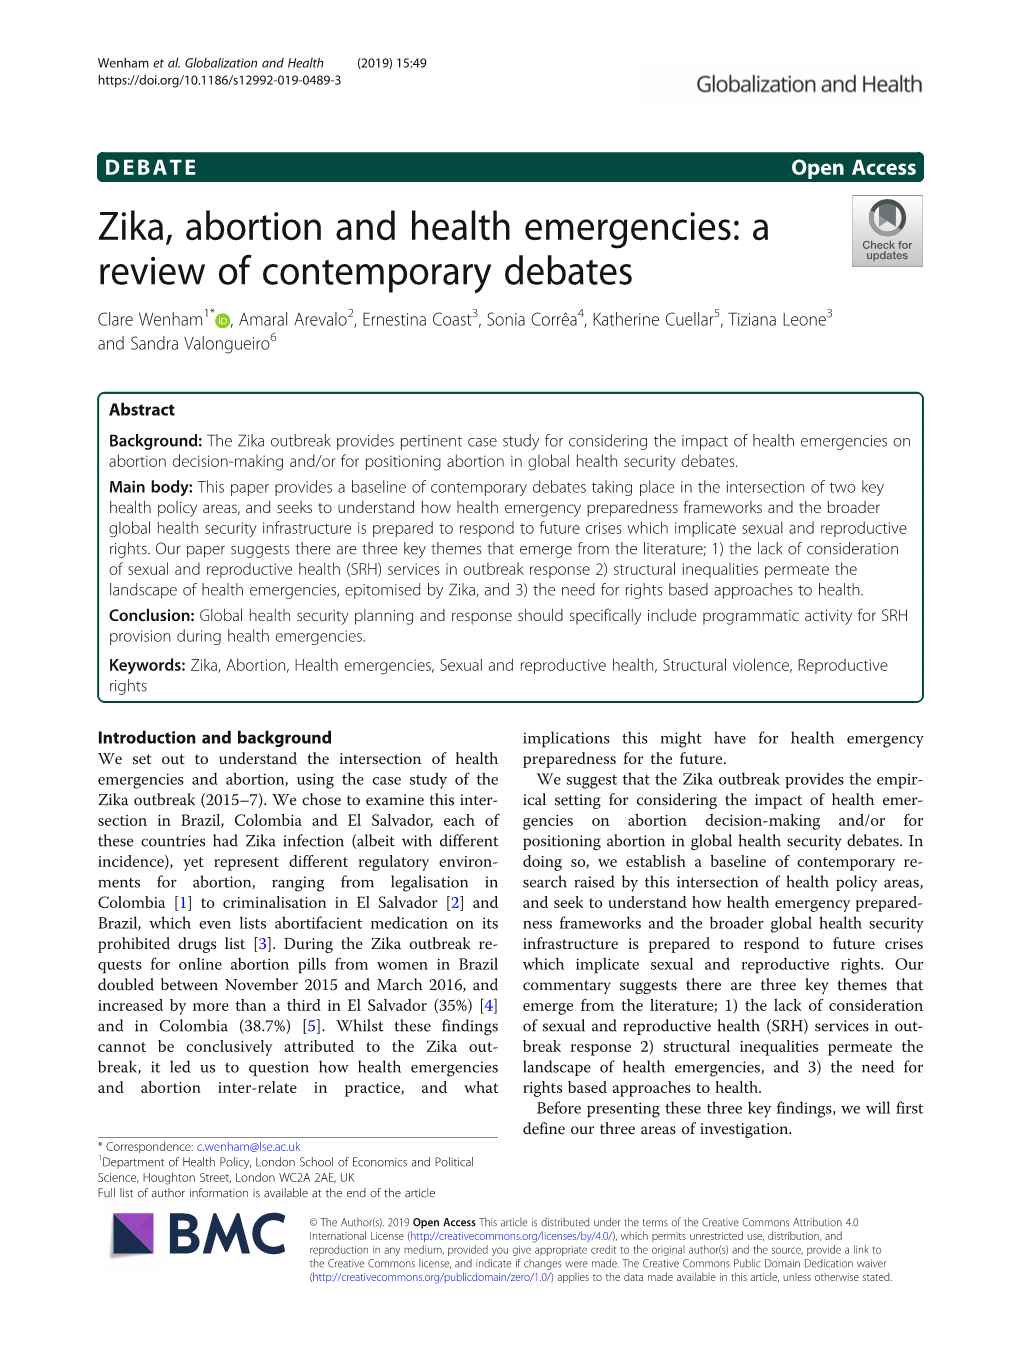 Zika, Abortion and Health Emergencies: a Review of Contemporary Debates